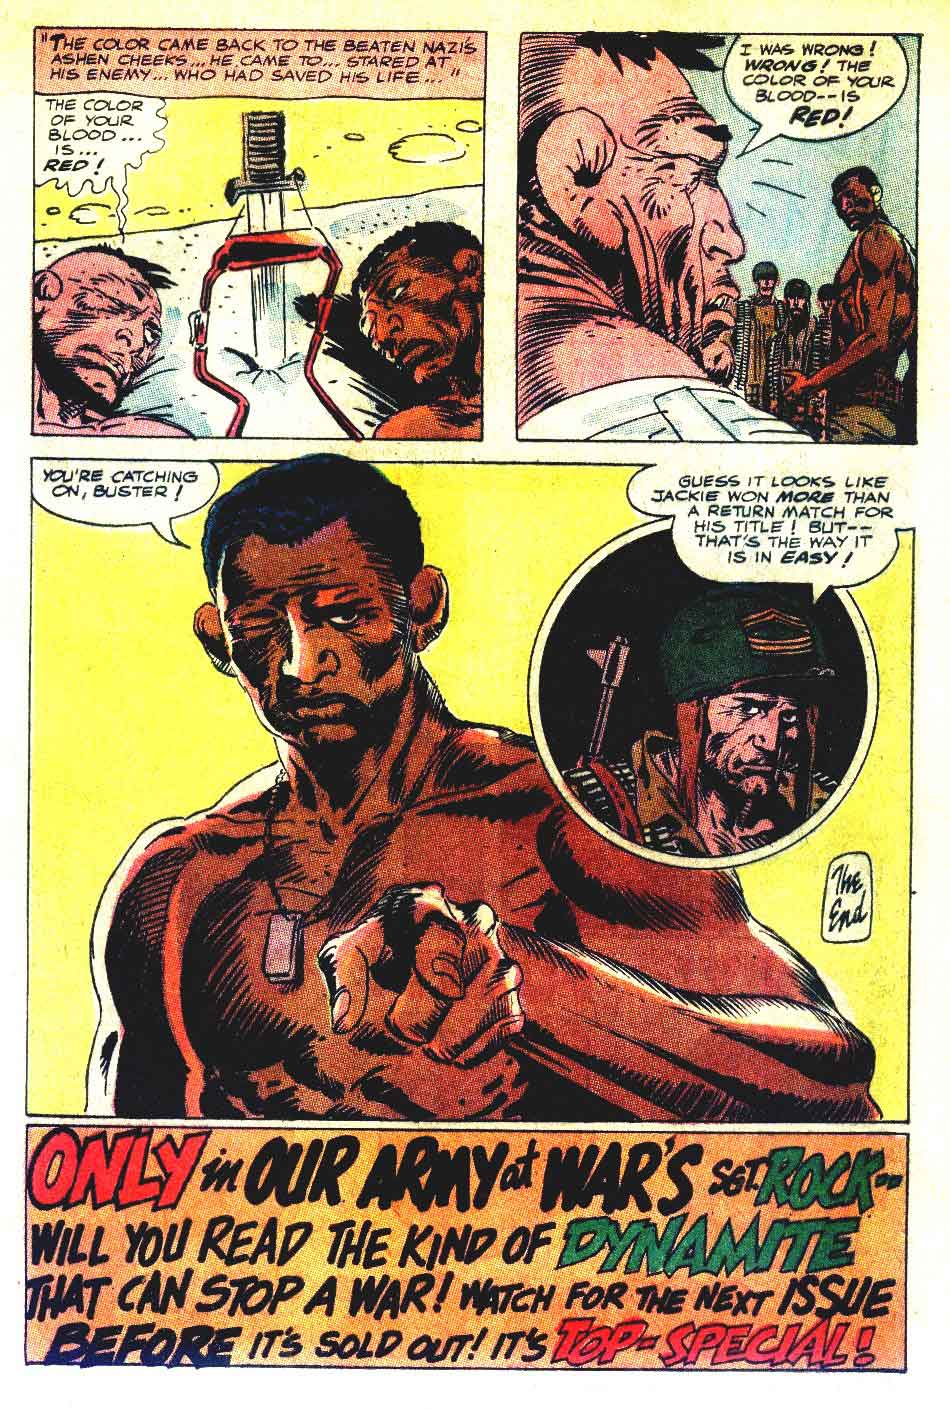 OUR ARMY AT WAR #160 featuring Sgt Rock in... "What's The Color of Your Blood?" by Bob Kanigher and Joe Kubert